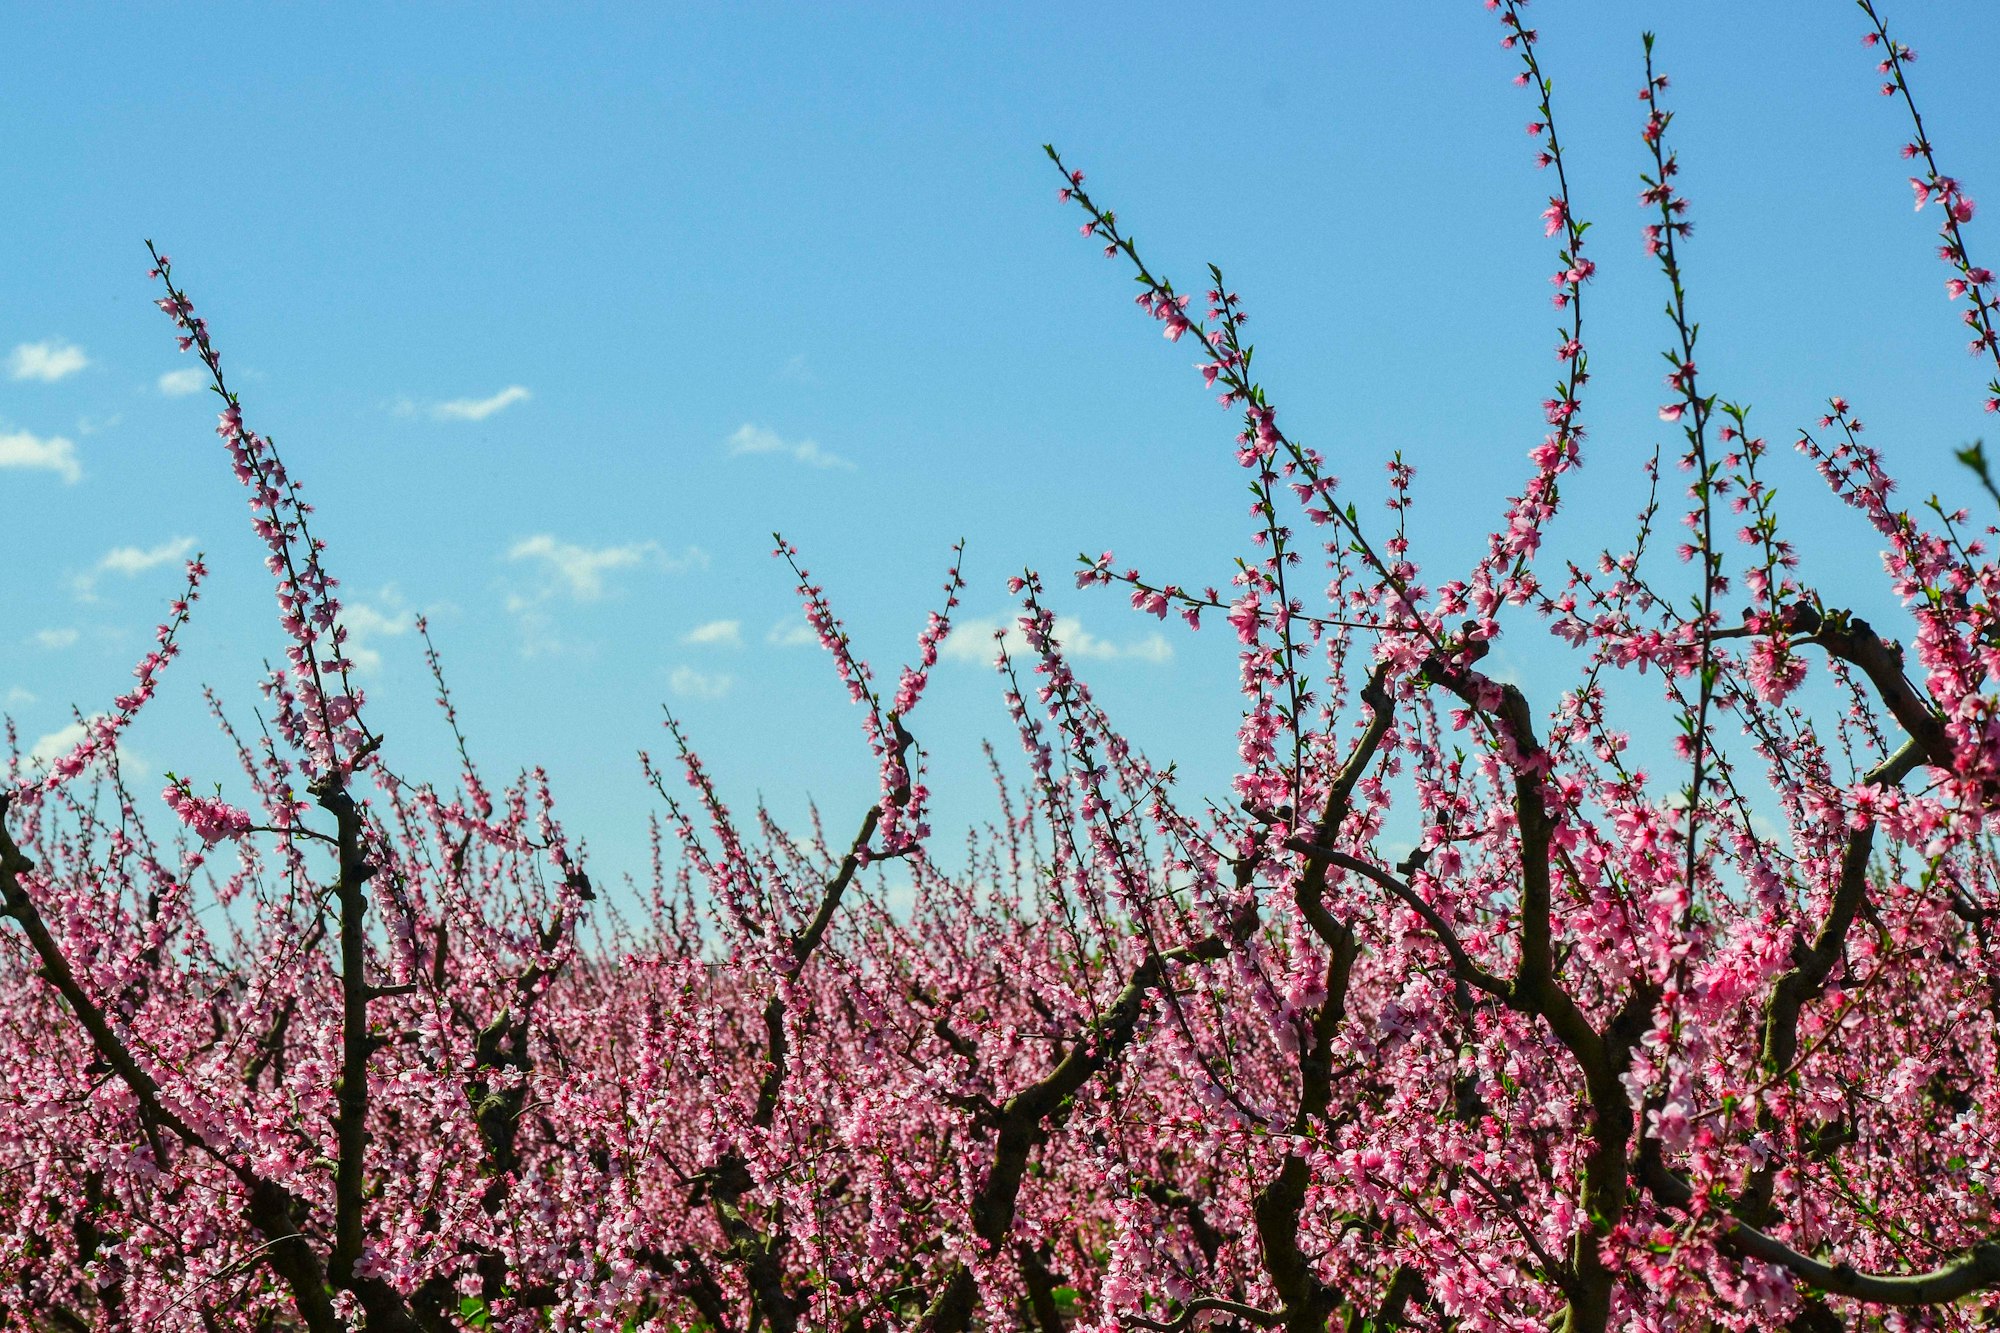 Field with tree in a blue sky. Pink flowers